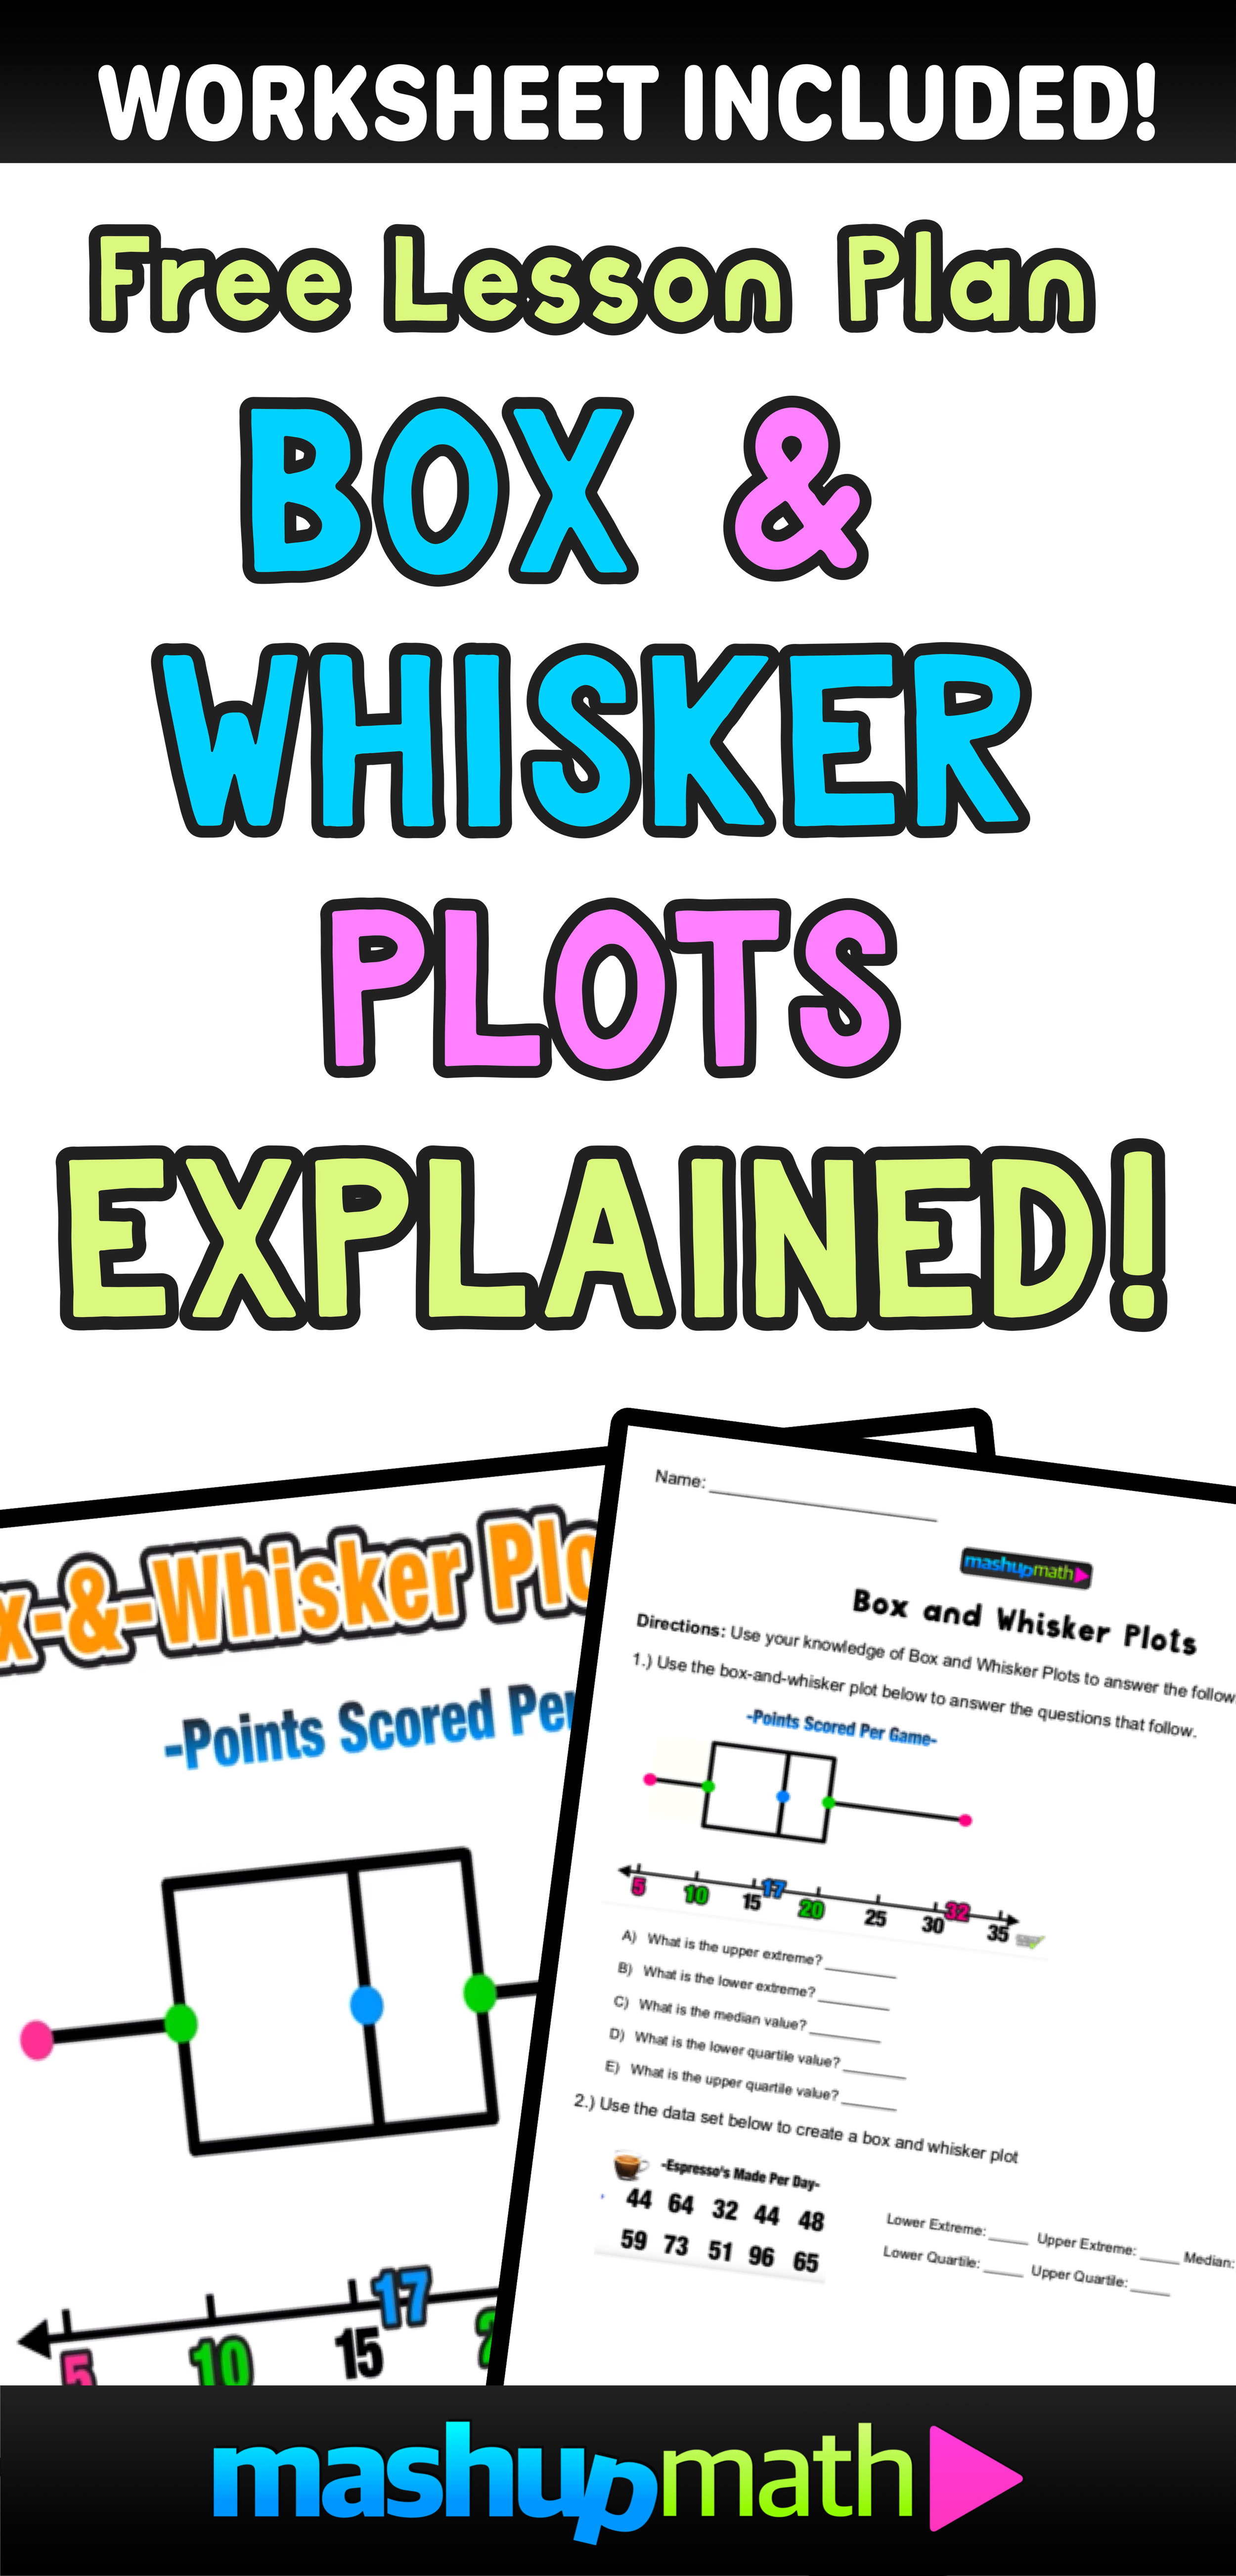 Box And Whisker Plots Explained In 5 Easy Steps Mashup Math